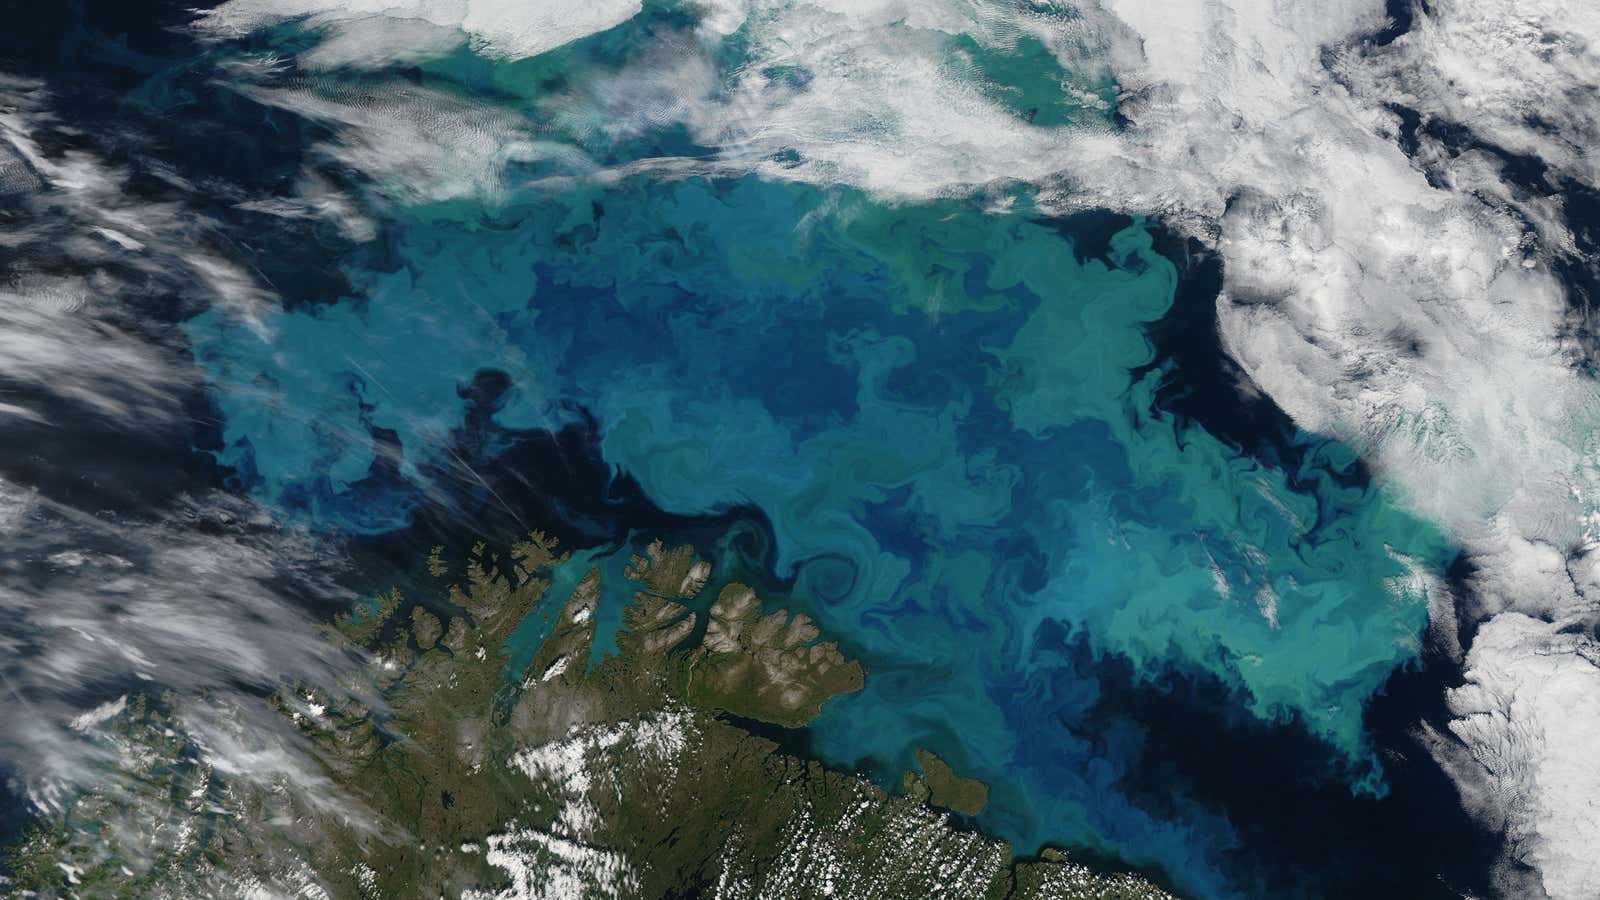 A phytoplankton bloom in the Barents Sea—not seeded by human intervention.